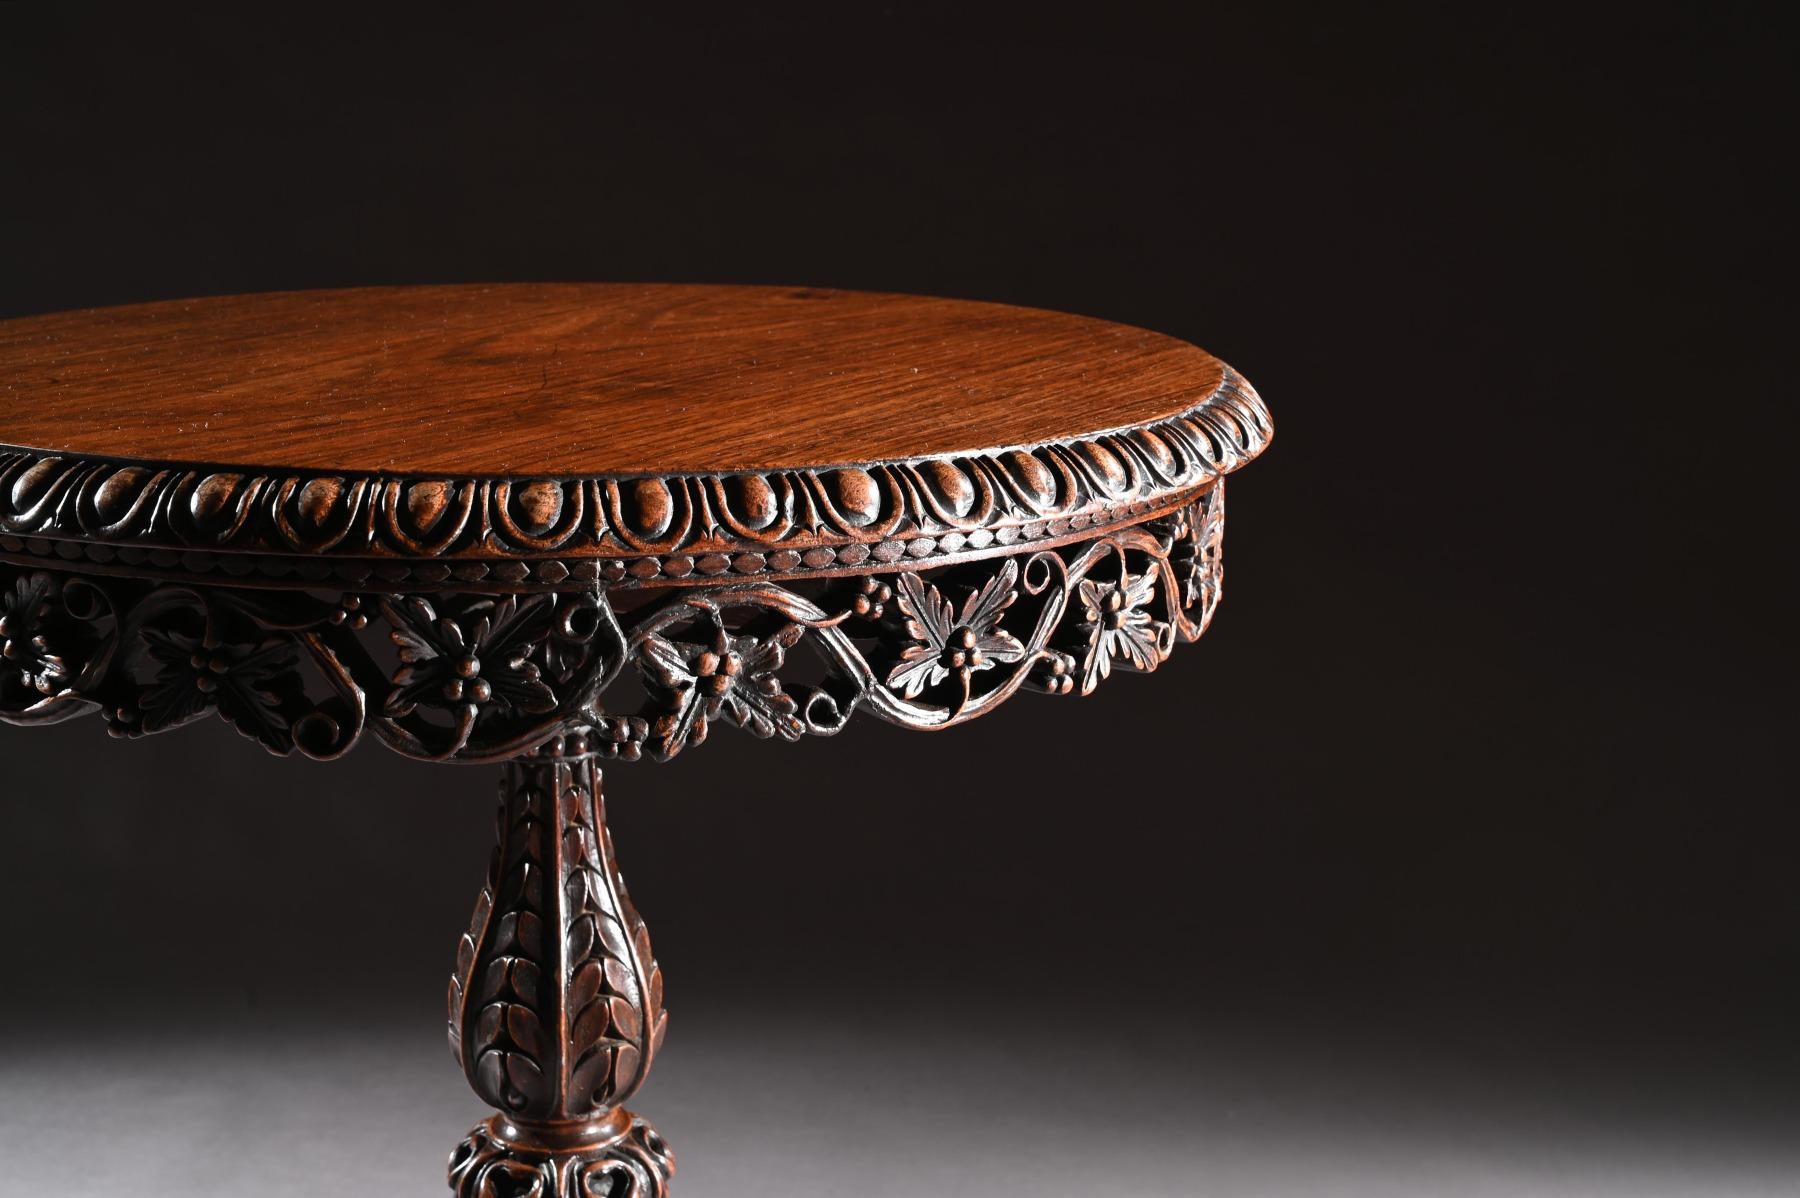 19th Century Finely Carved Anglo Indian Teak Tilt-Top Tripod Table In Good Condition For Sale In Benington, Herts